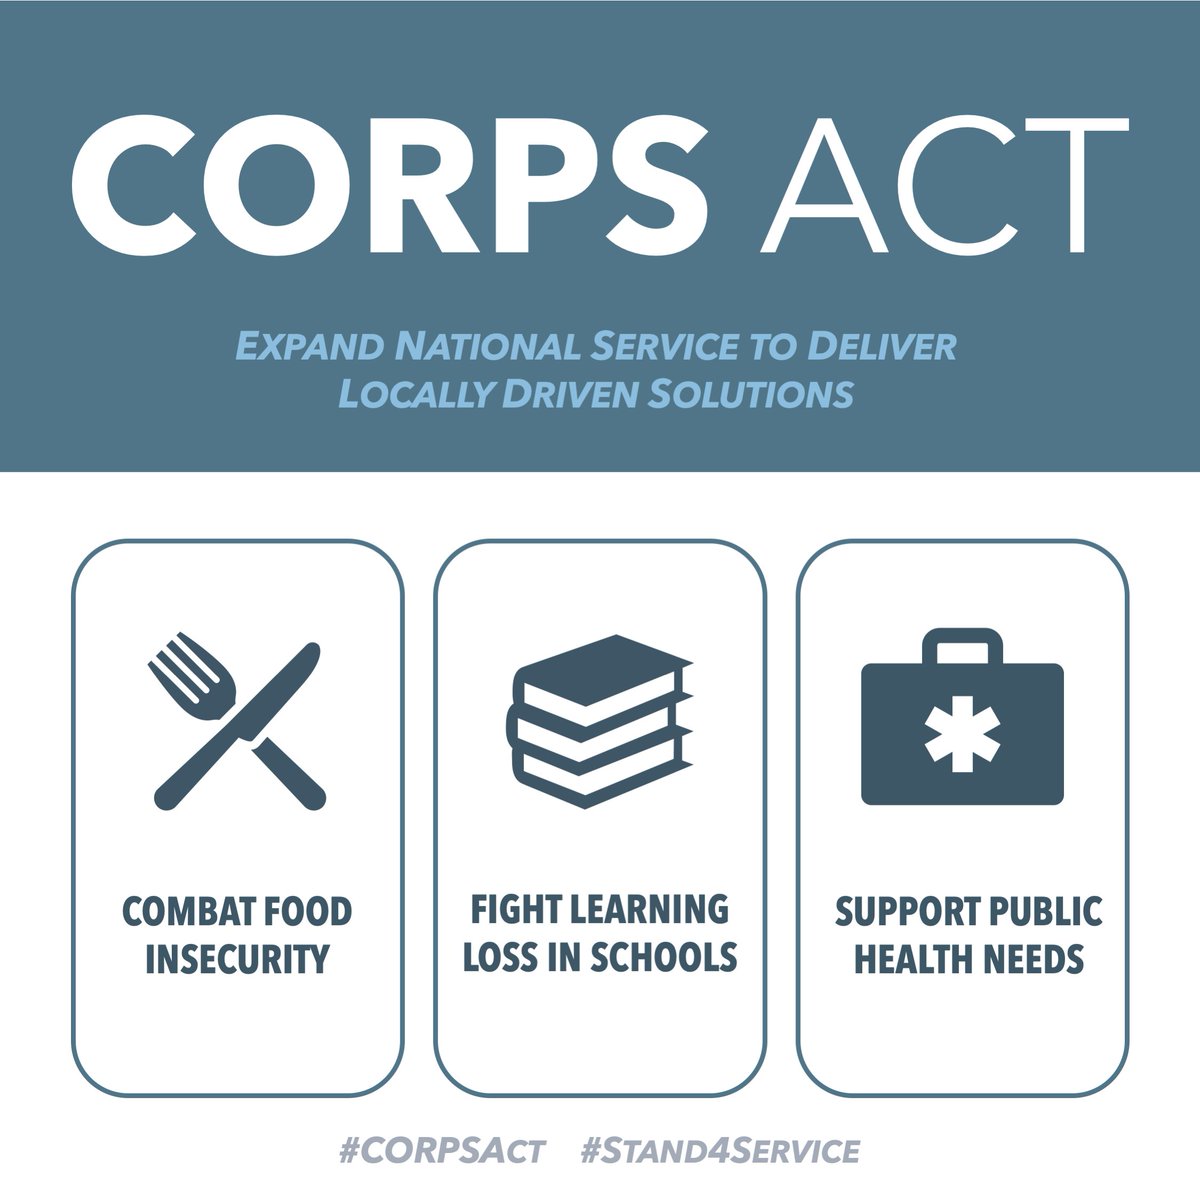 Persistent inequities in access to food, education, and health care have only been exacerbated by COVID-19. The #CORPSAct will scale up our locally driven @nationalservice programs to help uplift people and communities as we rebuild and recover. @Jumpstartkids #StandforService